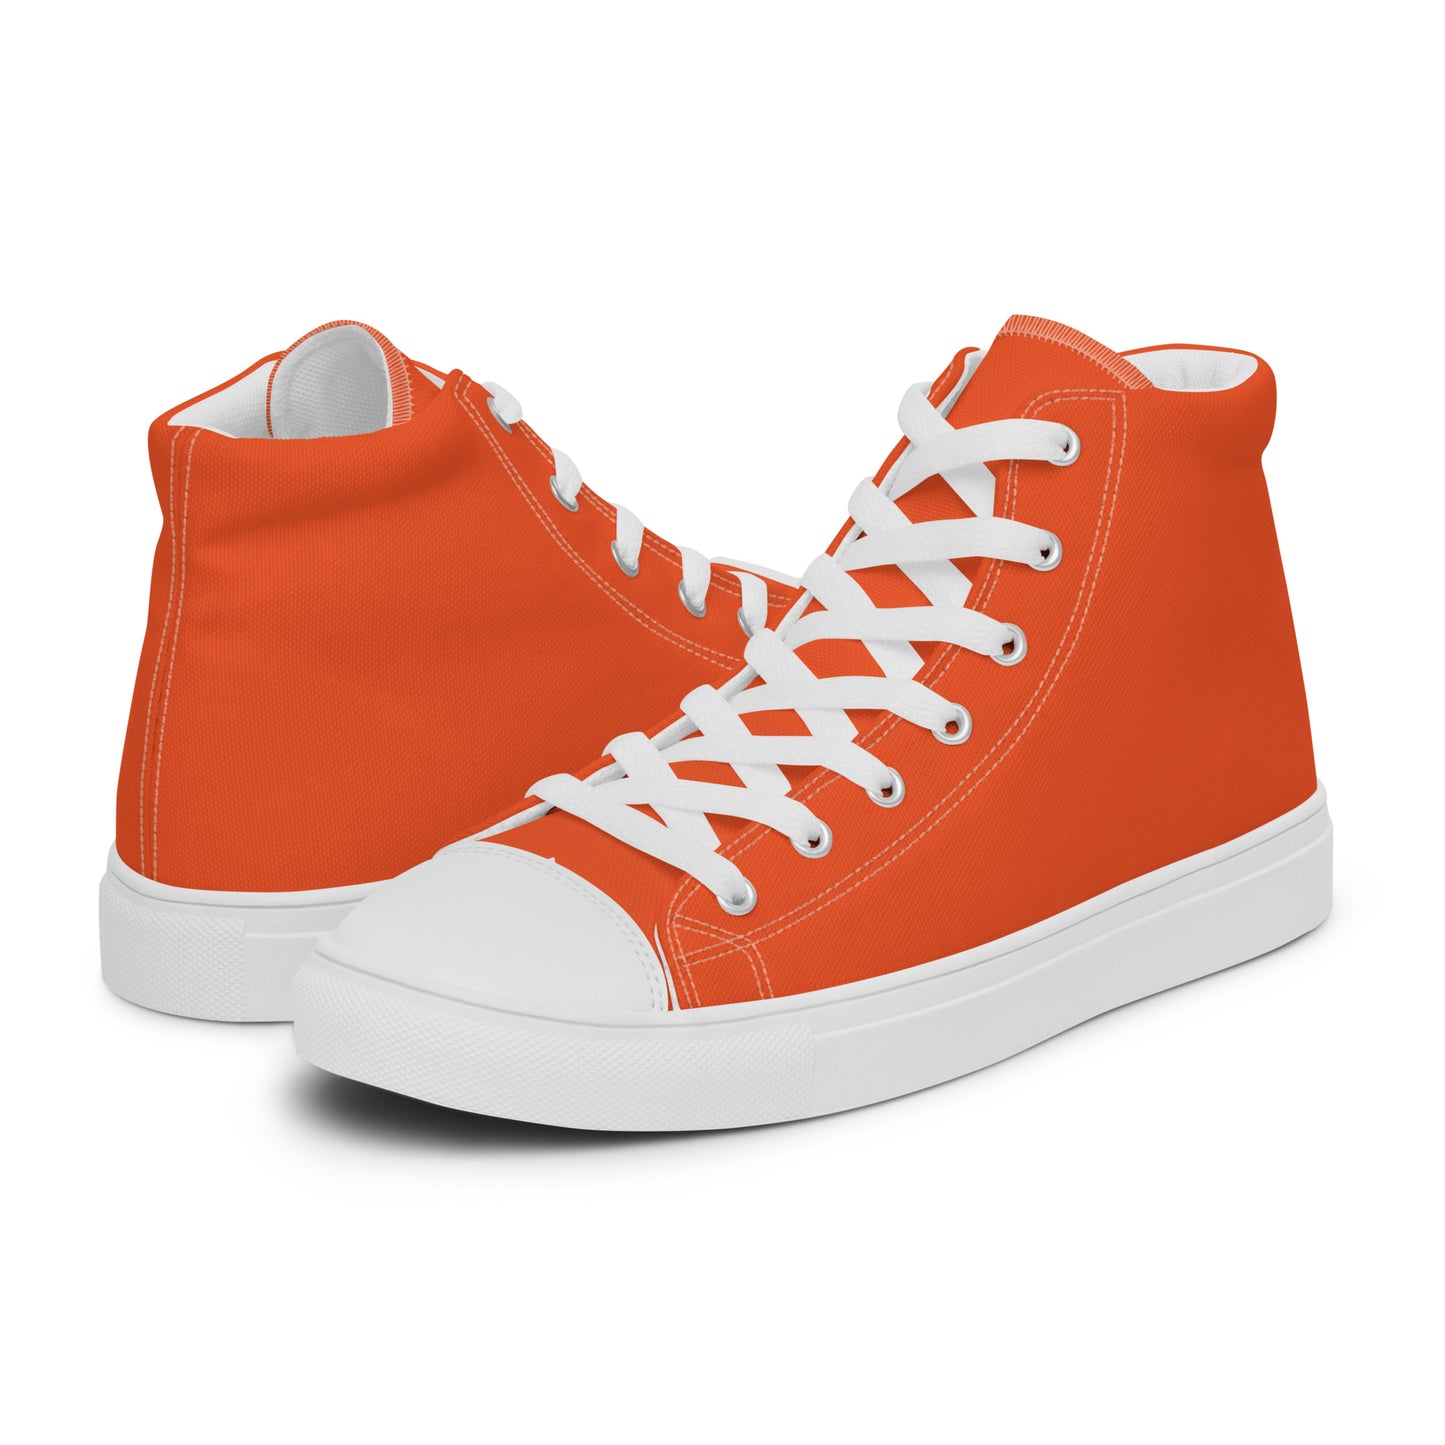 Basic Orange - Sustainably Made Men's High Top Canvas Shoes